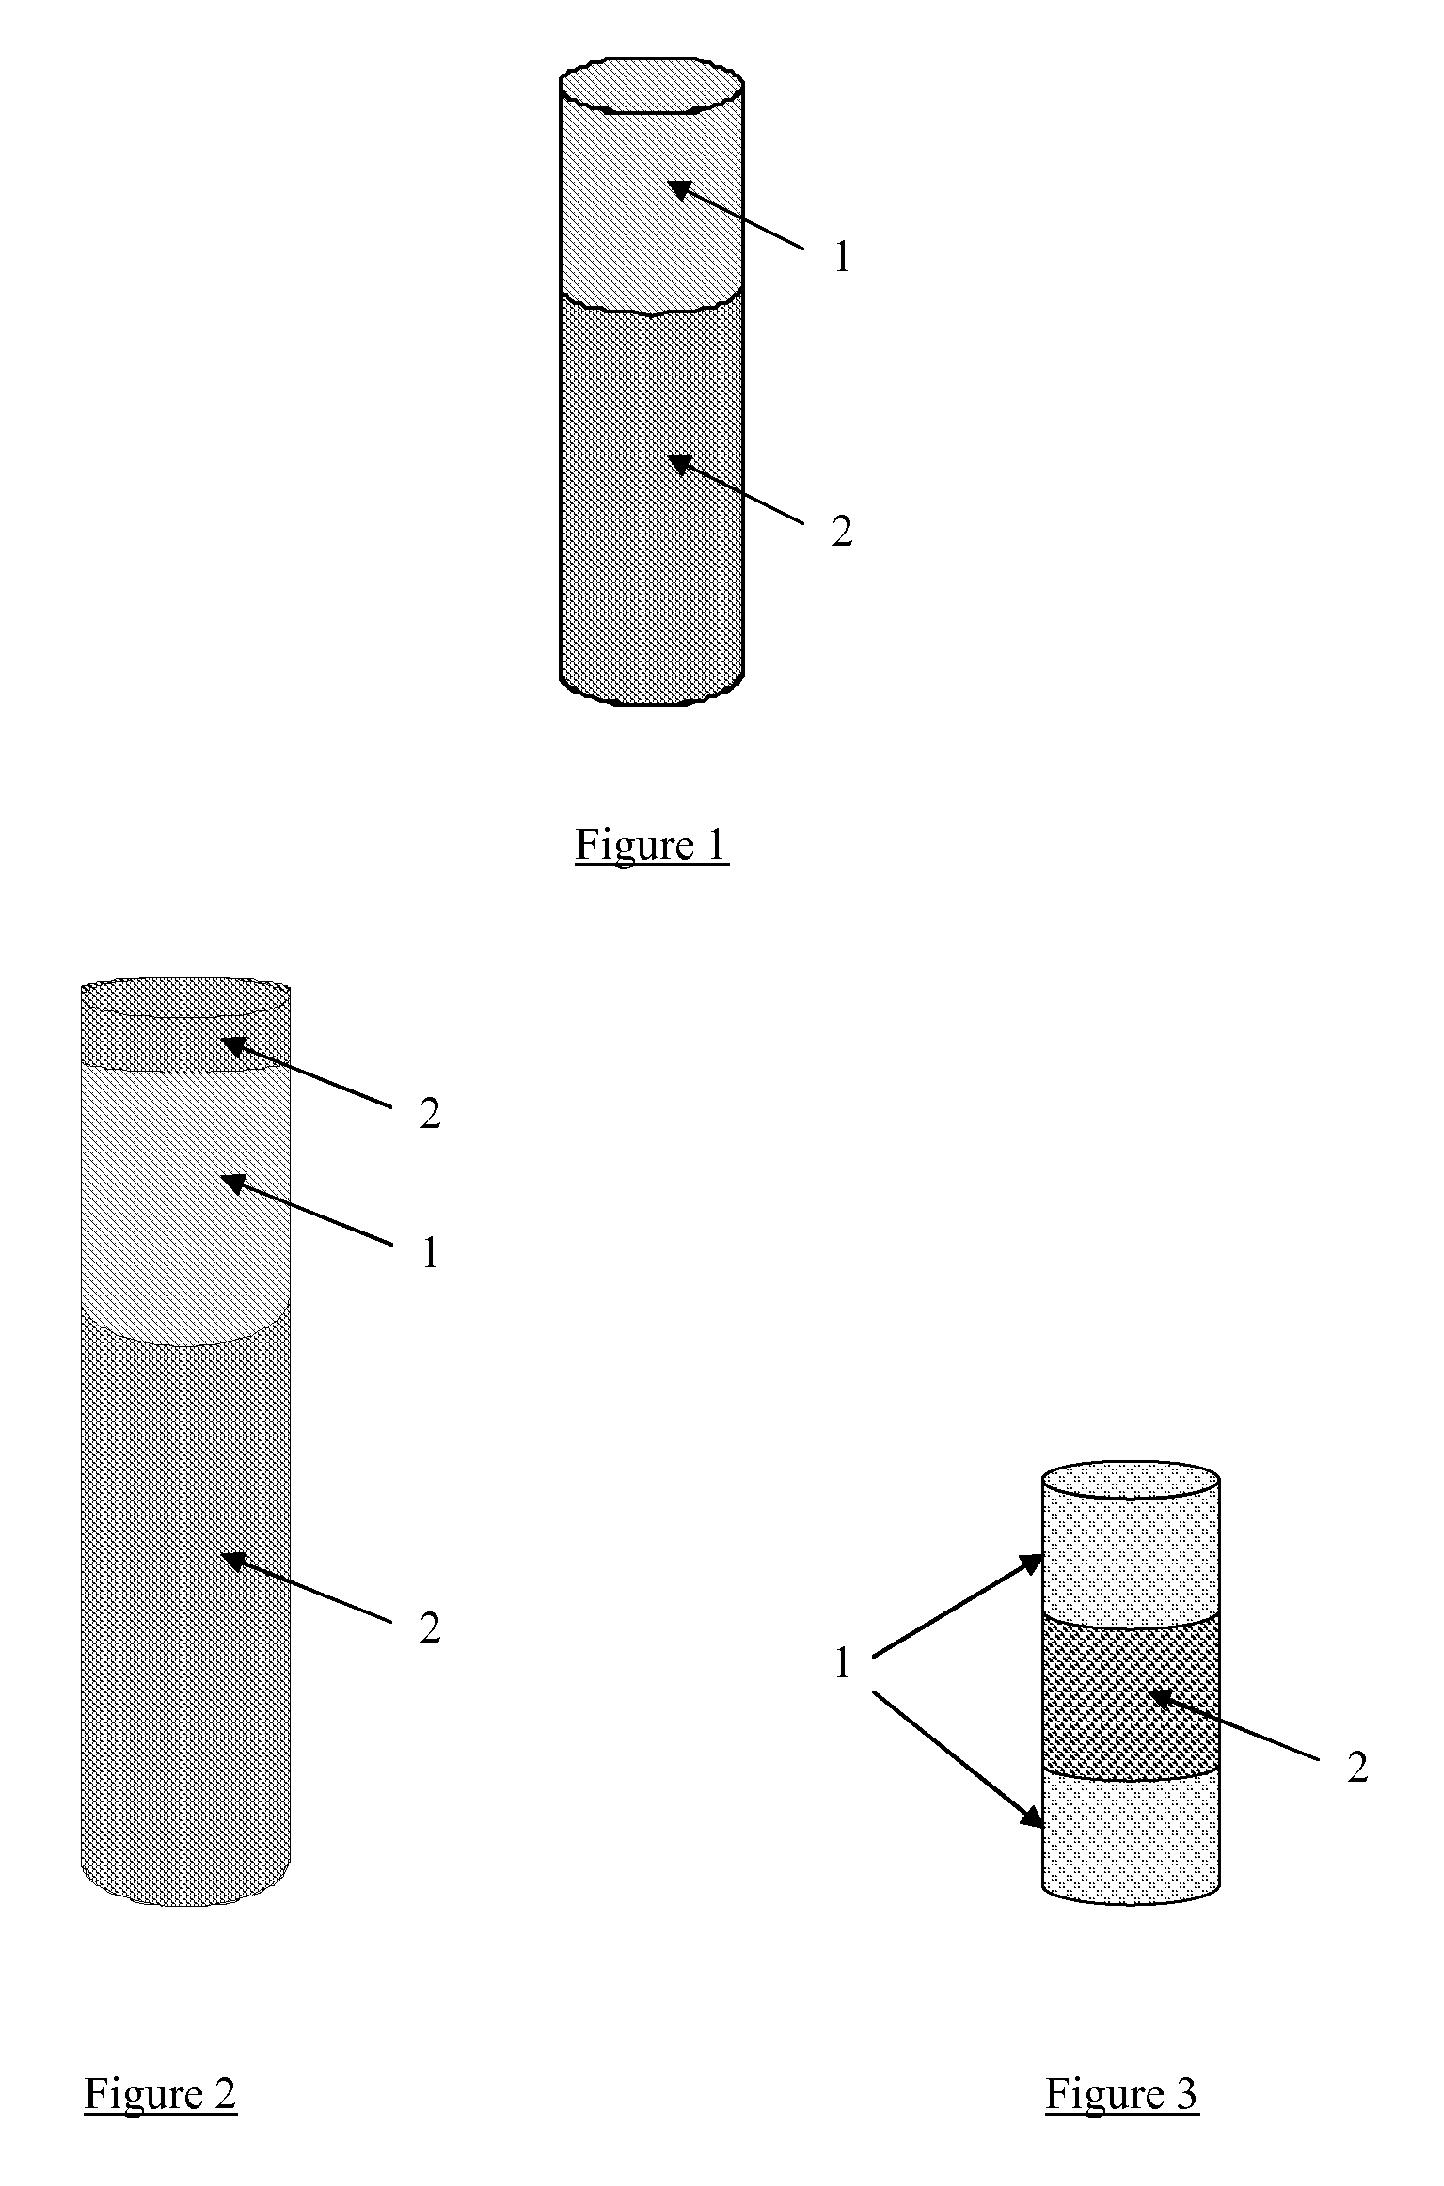 Catalytic reactor including one cellular area having controlled macroporosity and a controlled microstructure and one area having a standard microstructure